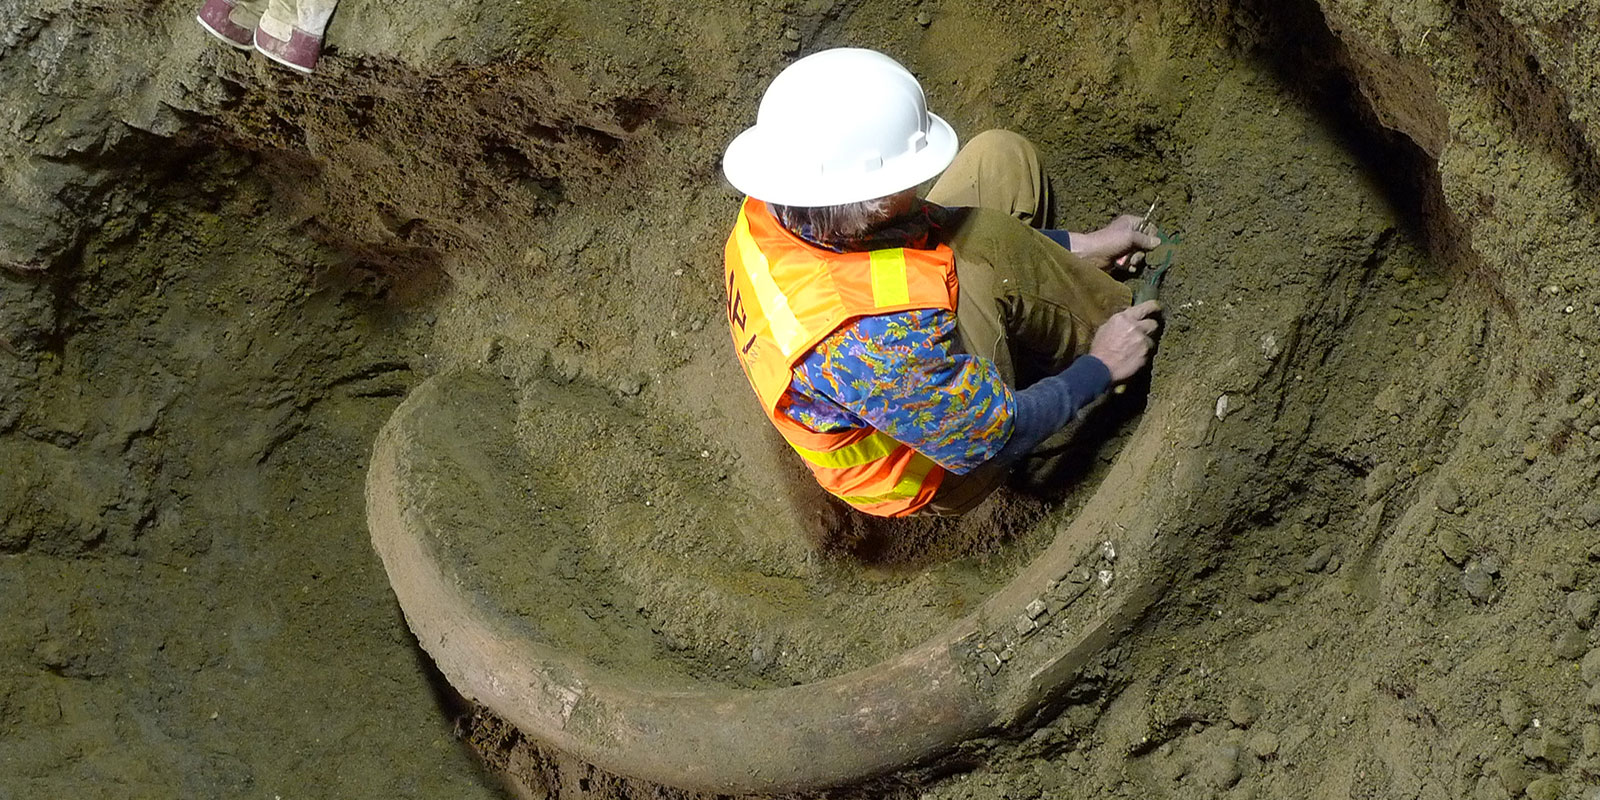 A man wearing a hard hat and safey vest applies plaster to the exposed mammoth tusk while it's still in the ground